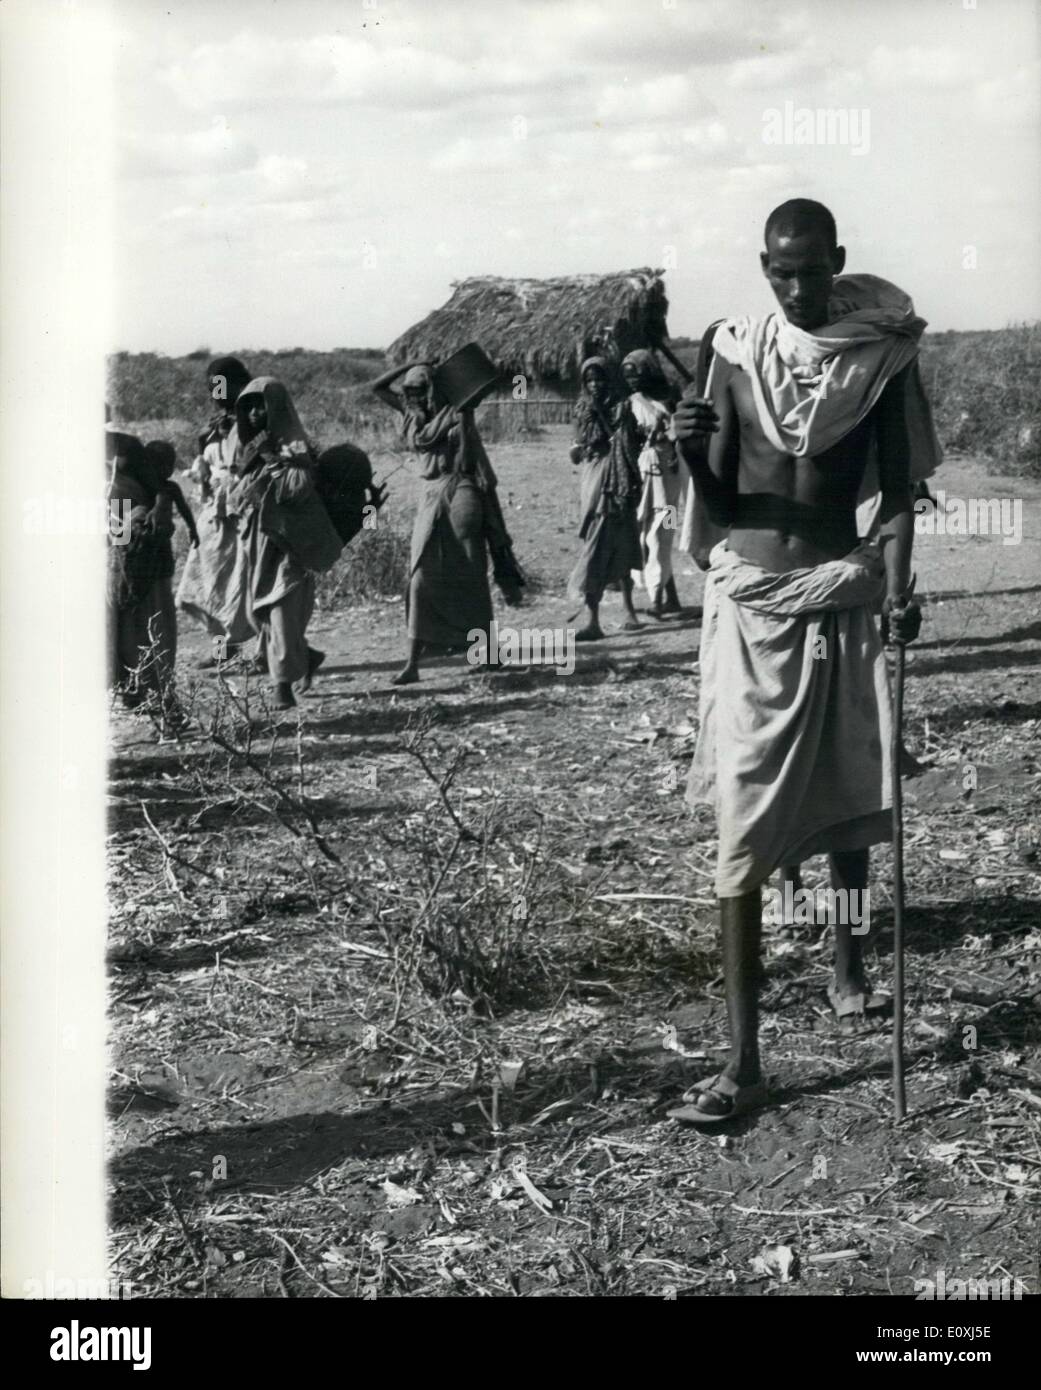 Feb. 02, 1967 - Refugees Cross Into Somalia: The first pictures taken on the Kenya Ethiopia/Somalia border post at Pullo Hawa, Somalia. Thousands of Somalia refugees are crossing into Somalia every day from Kenya and Ehtiopia. Refugees arriving at Bullo Hawa are almost starving to death with hunger and thirst, they complain about the way they are being treated by the Kenya and Ethiopian soldiers. The refugees, mainly women and children, complain that their men folk are being killed, cattle raided and villages are burned by Kenya and Ethiopian soldiers Stock Photo